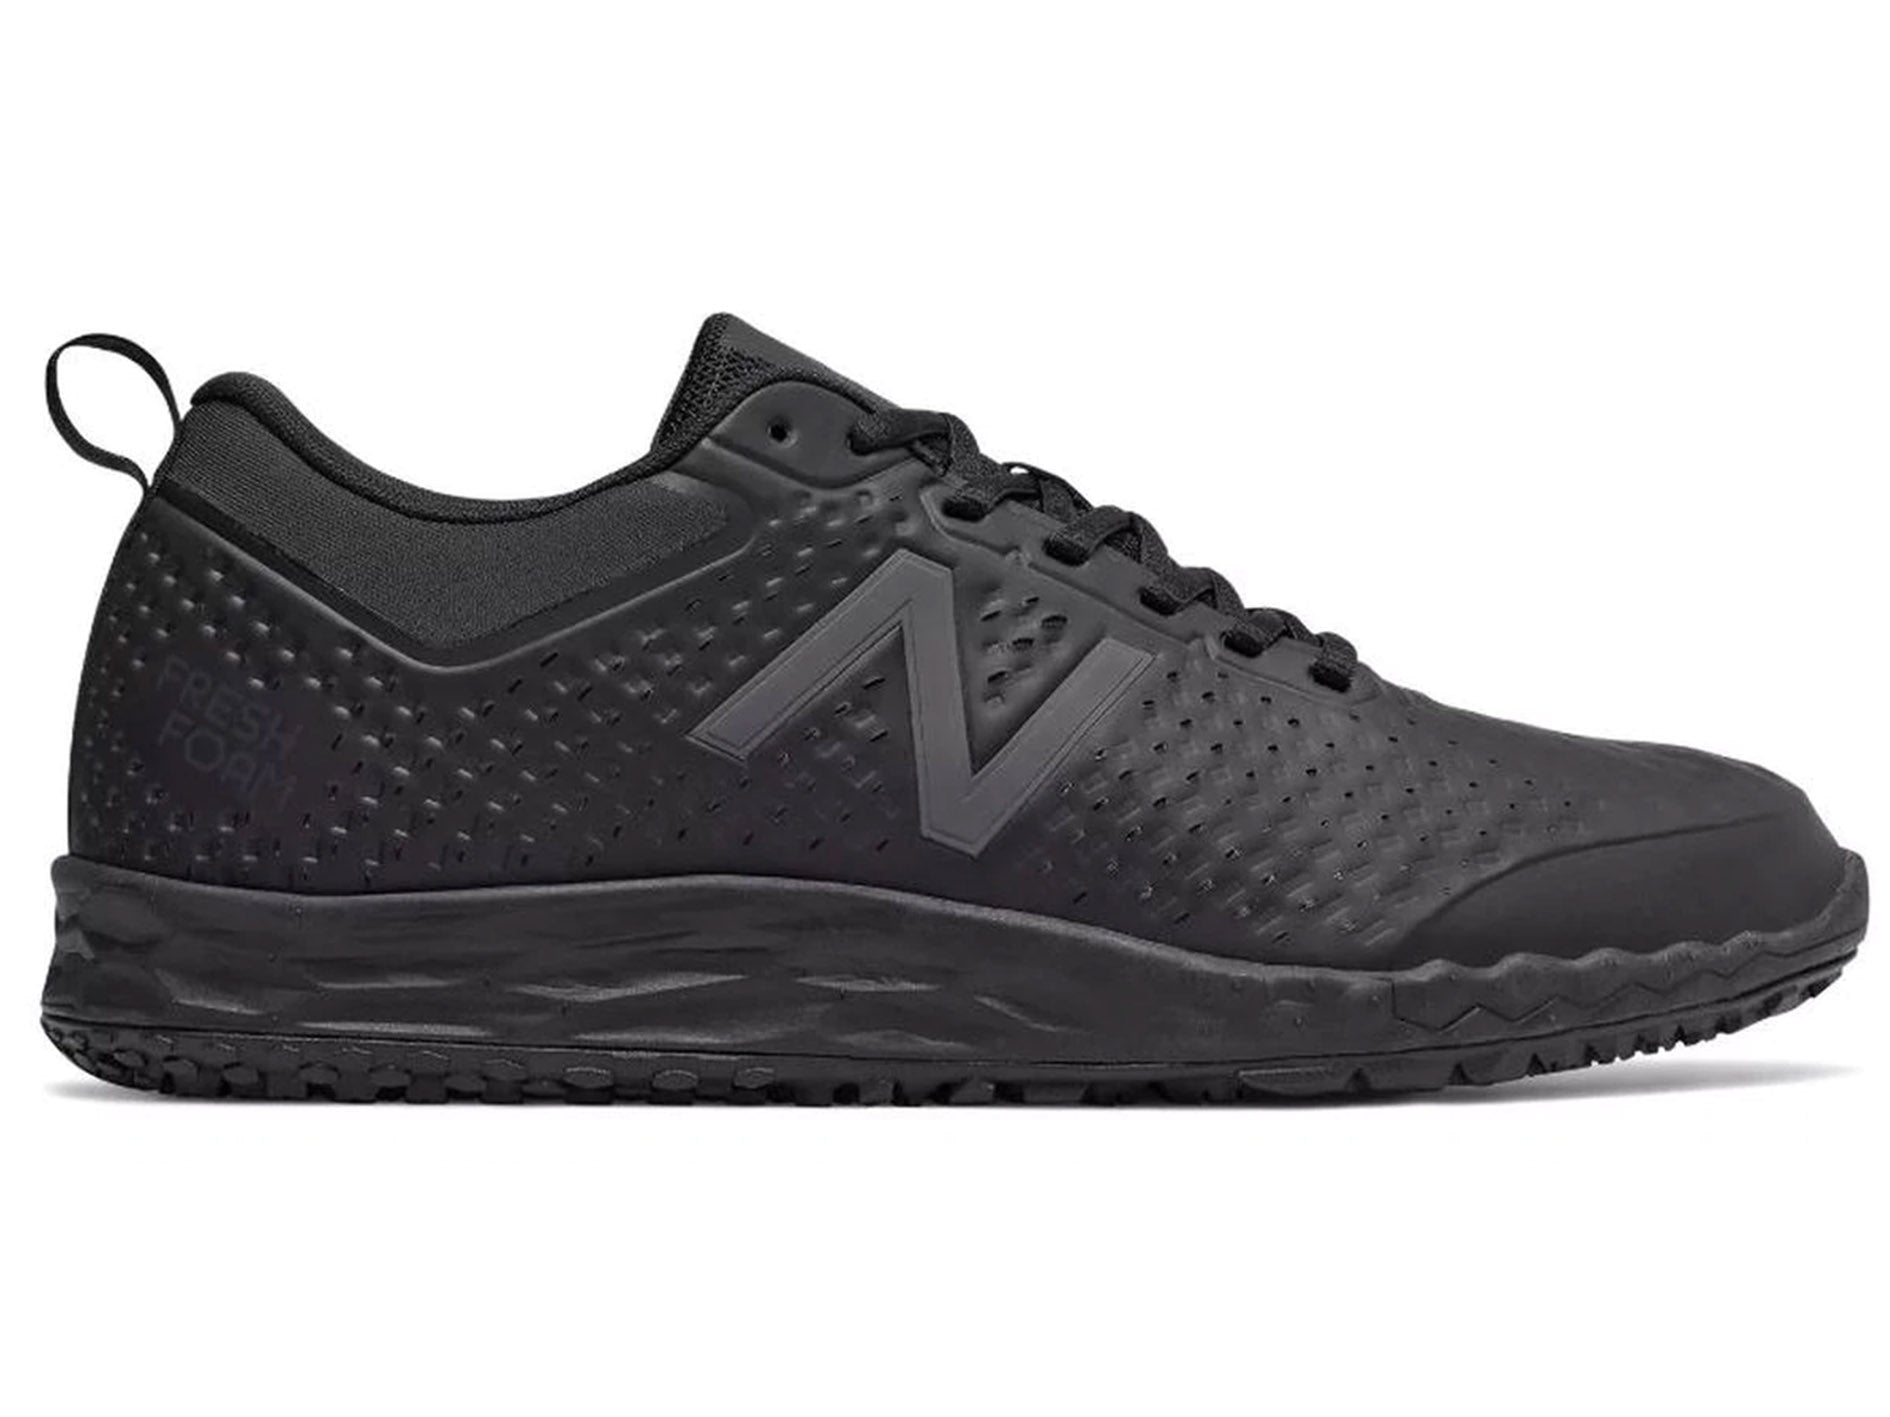 new balance slip resistant shoes womens